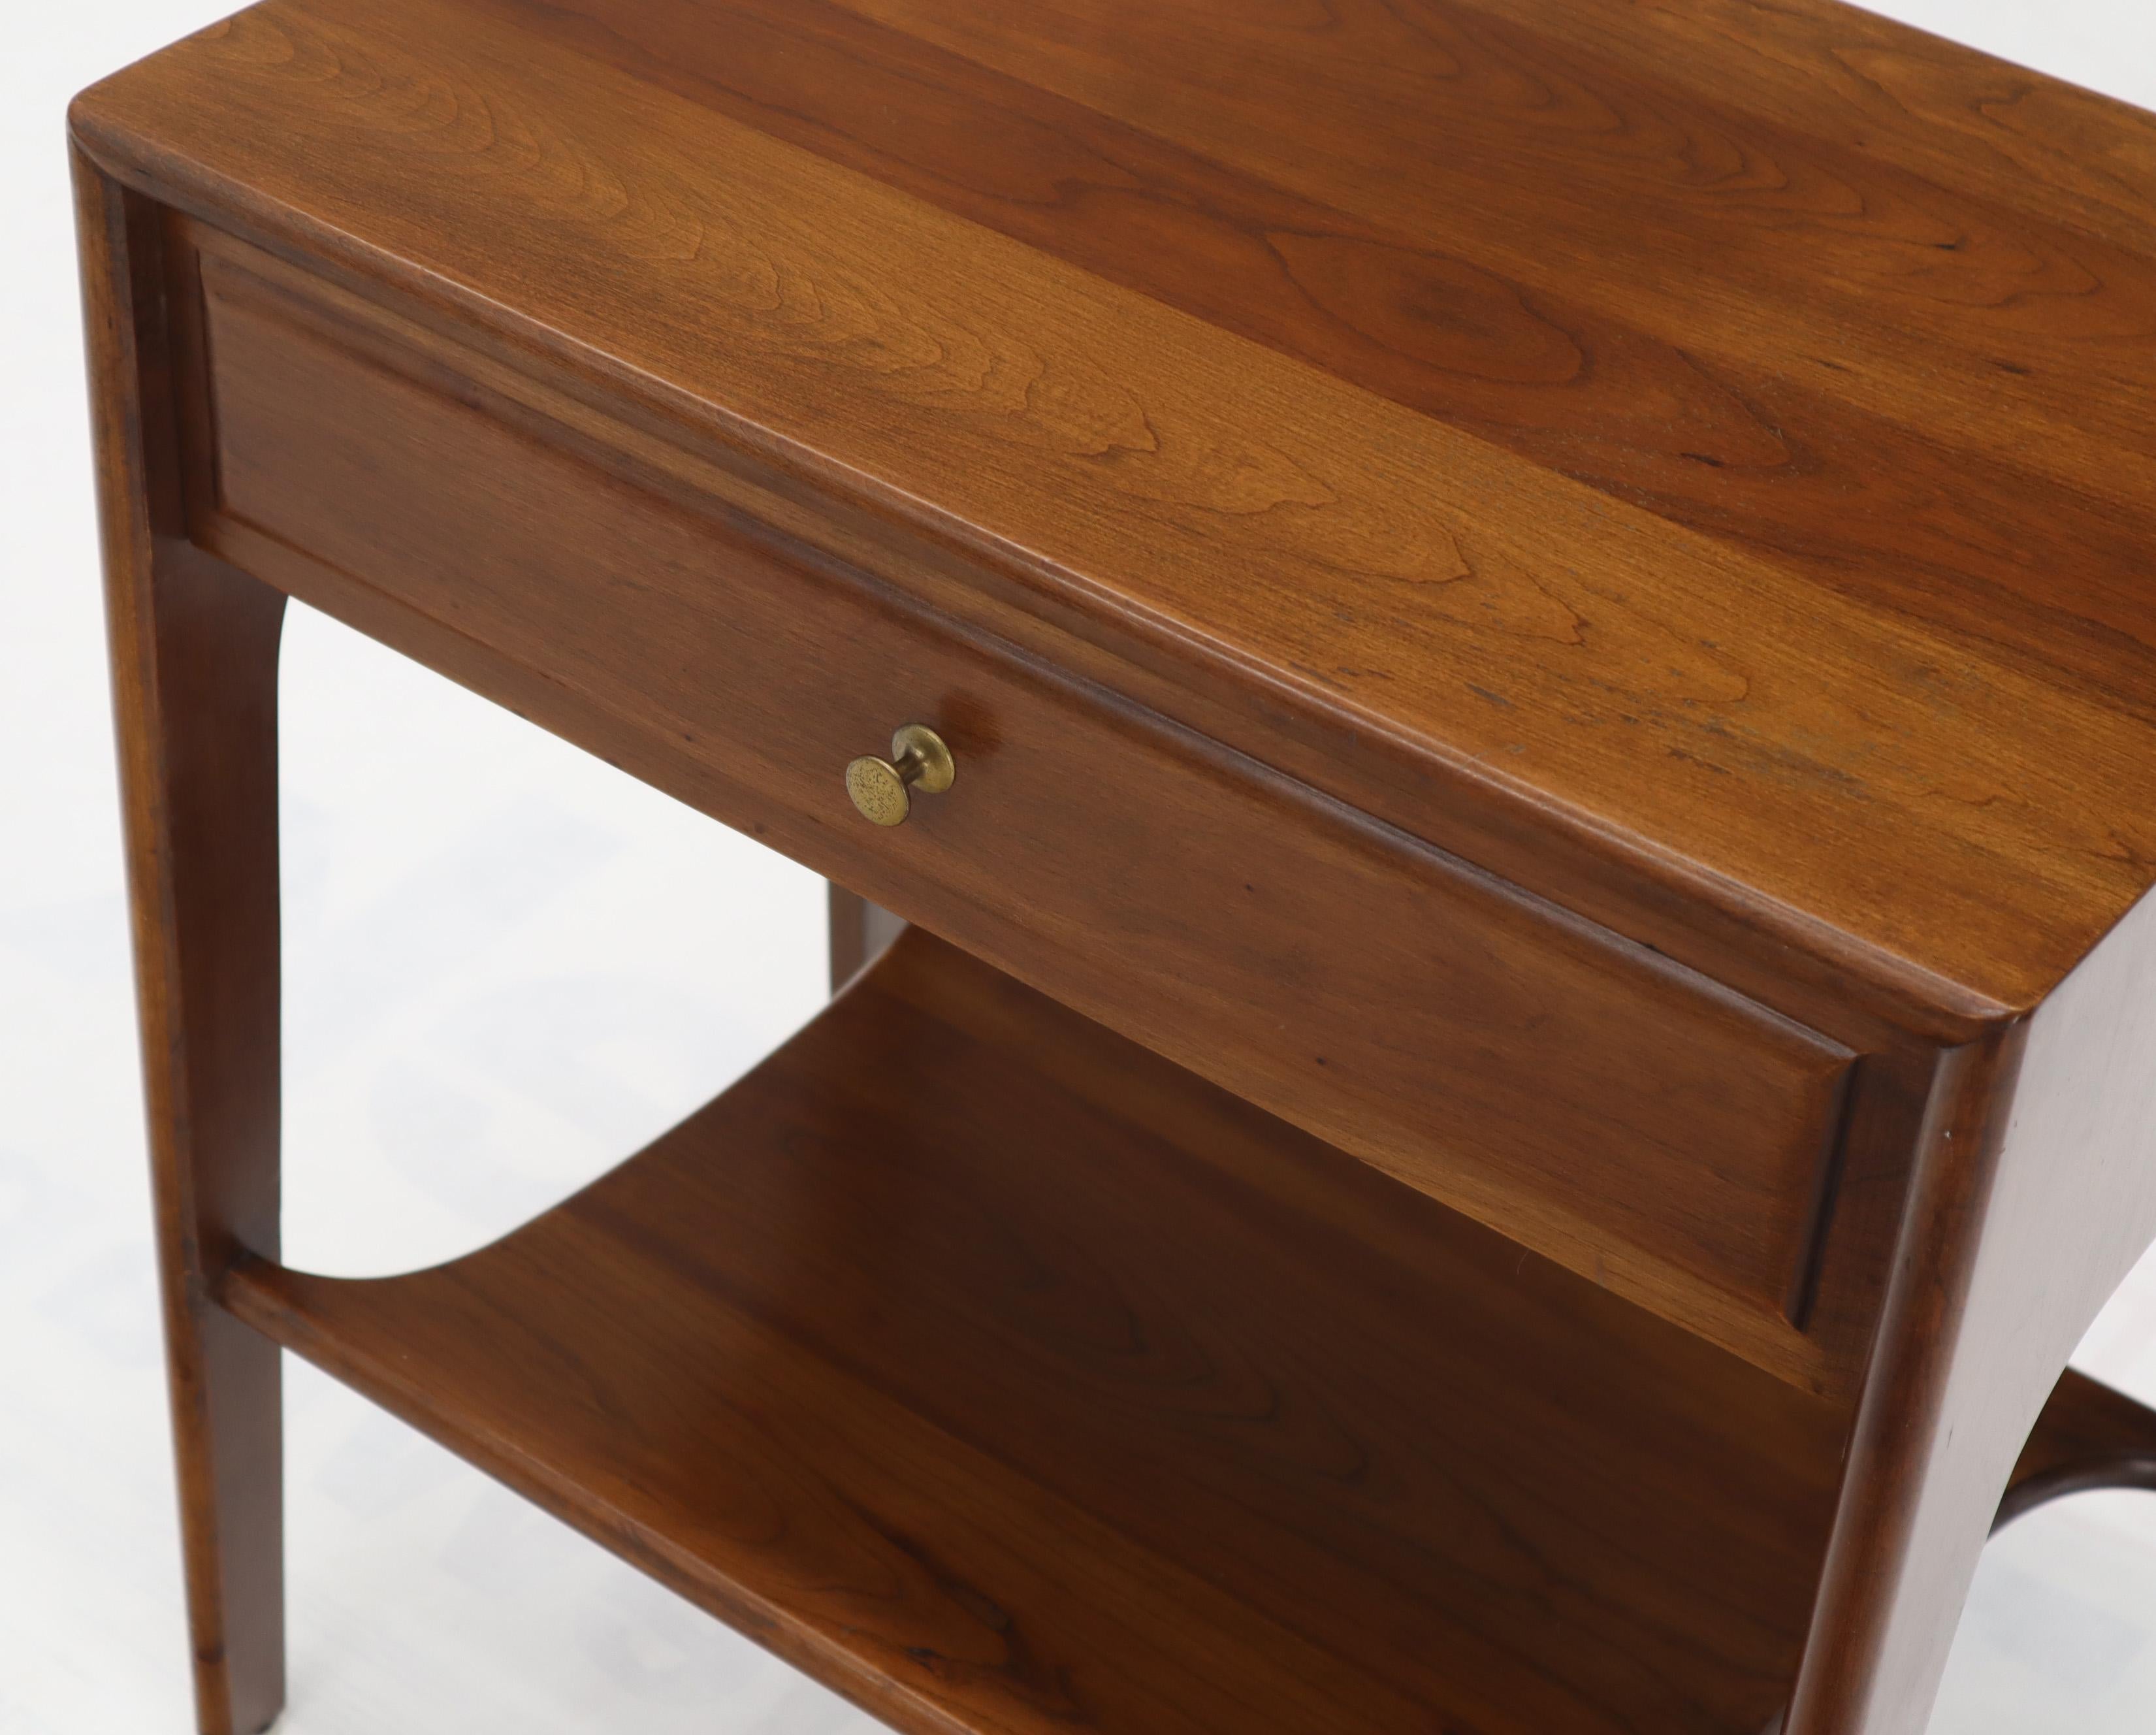 Lacquered Solid Cherry One Drawer End Table Nightstand Mid-Century Modern